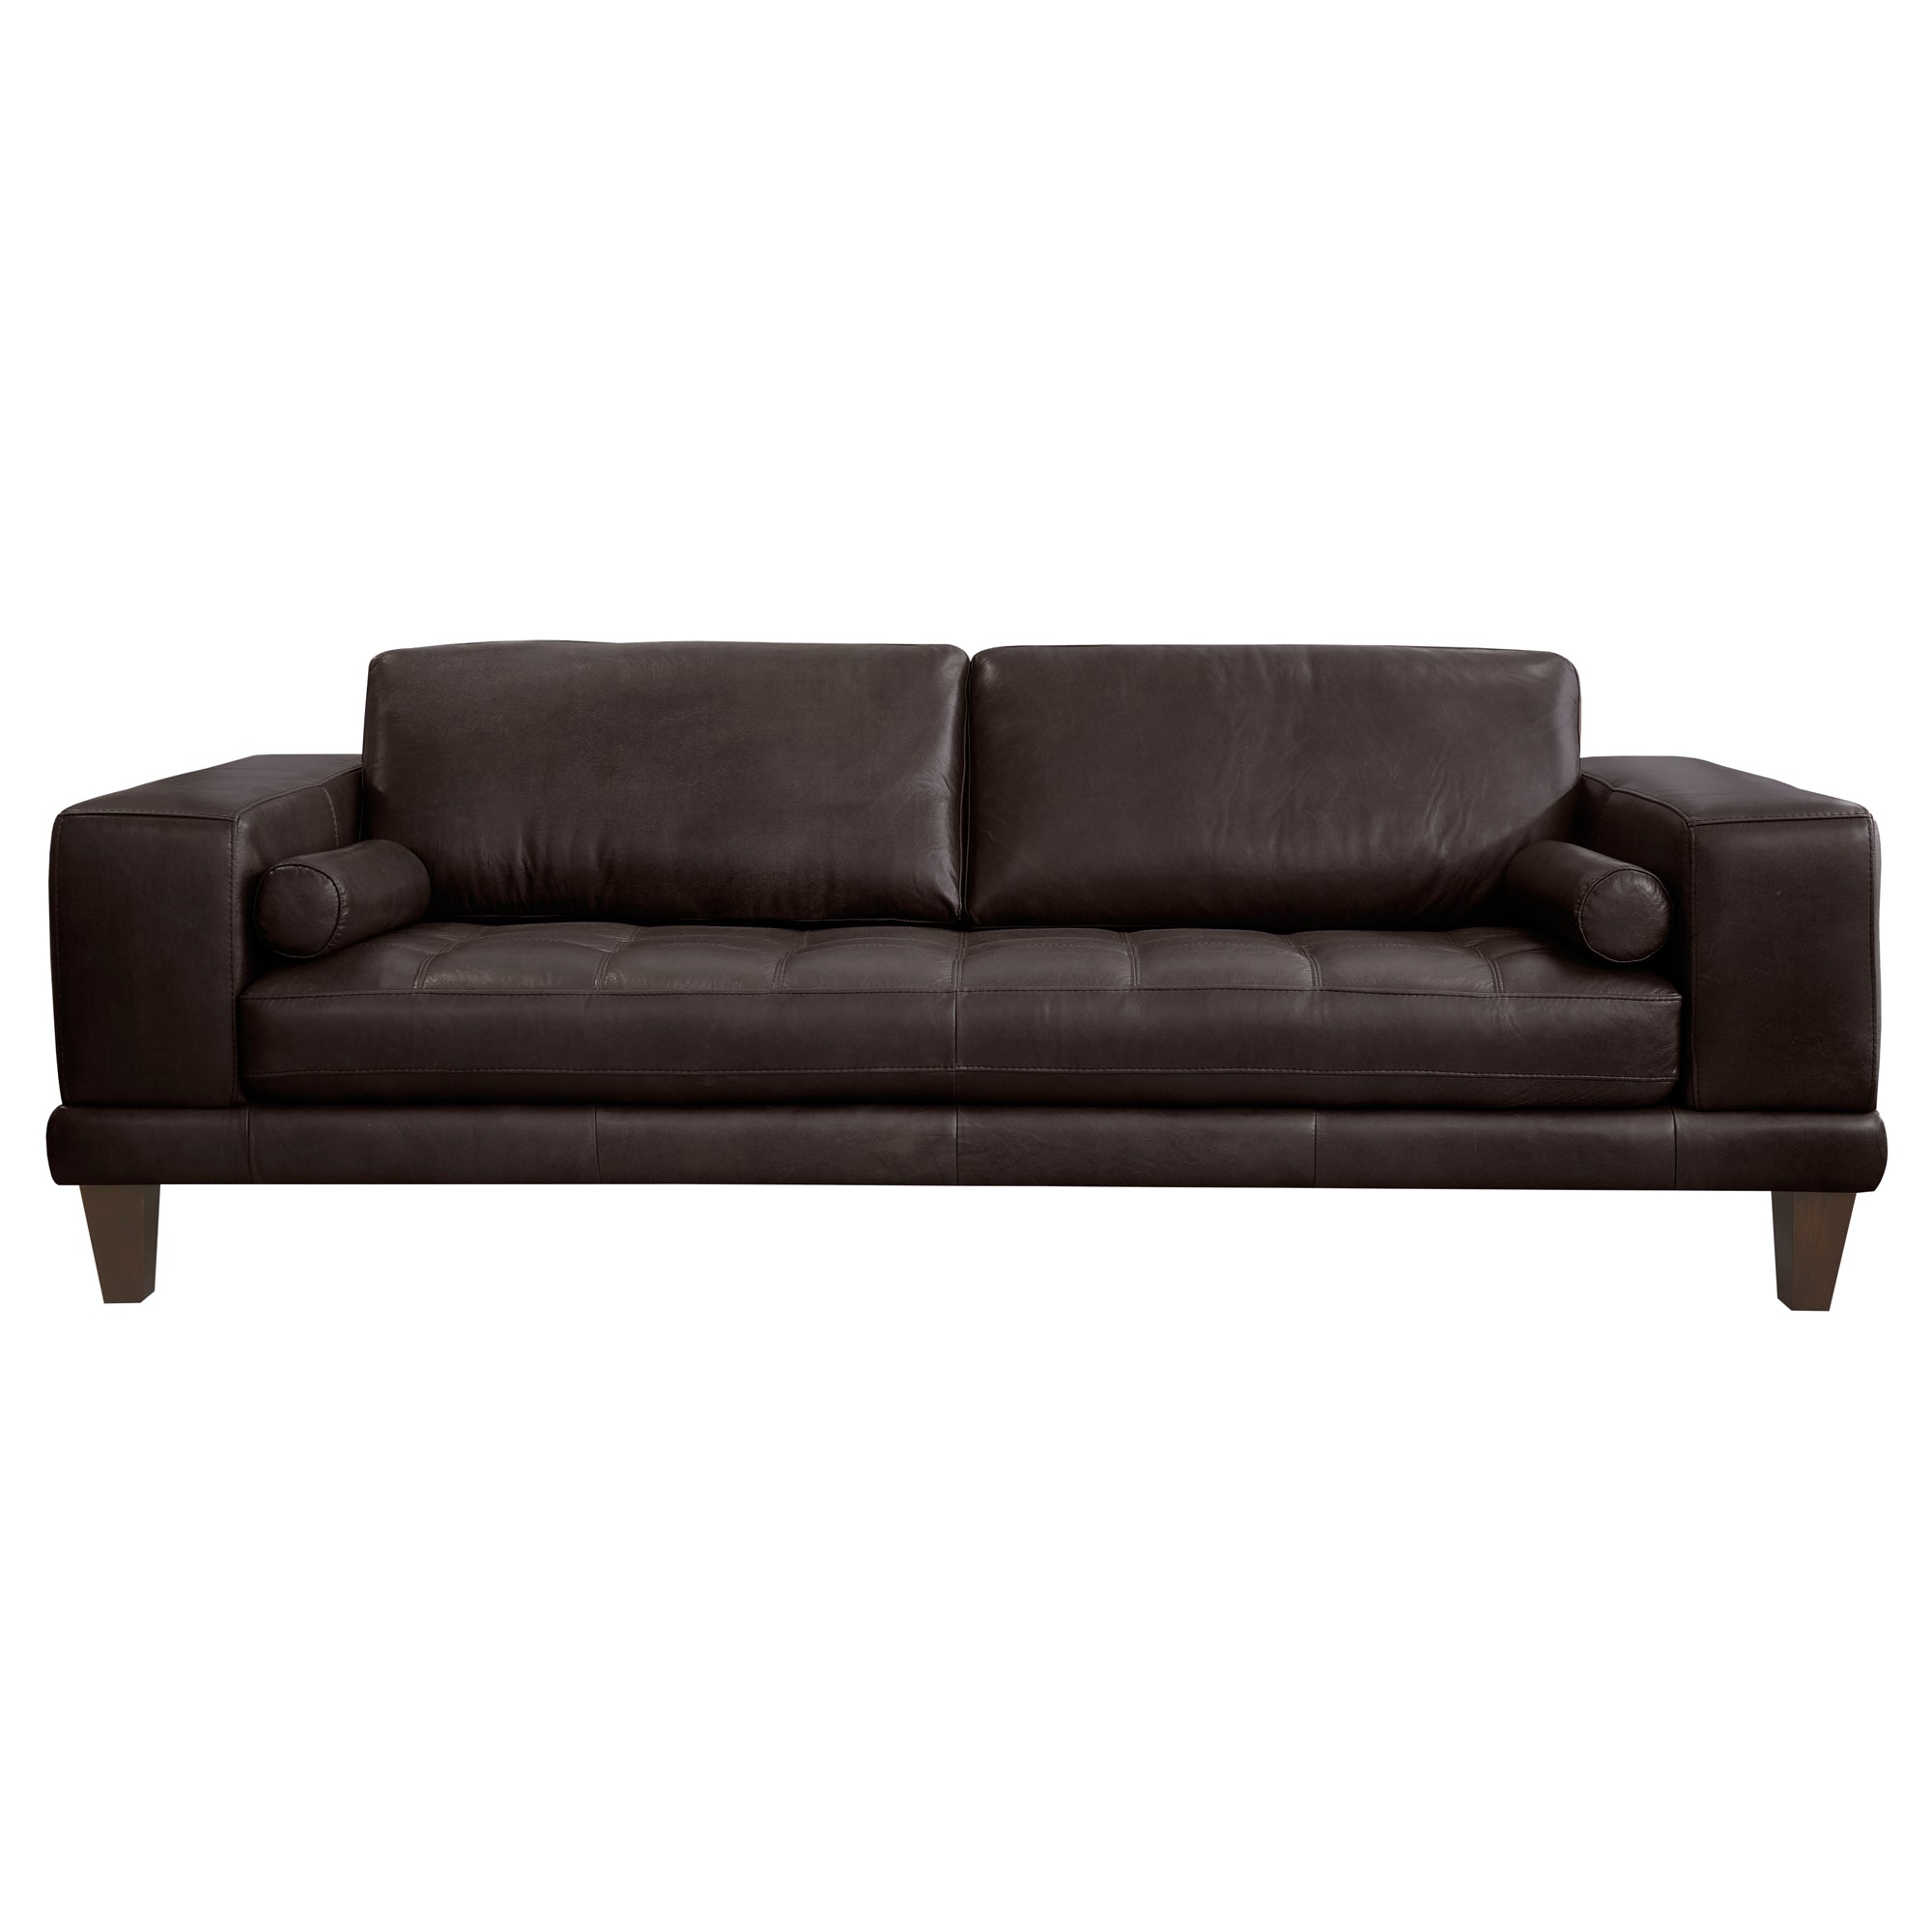 Armen Living Lcwy3brown Wynne Contemporary Sofa In Genuine Espresso Leather With Brown Wood Legs